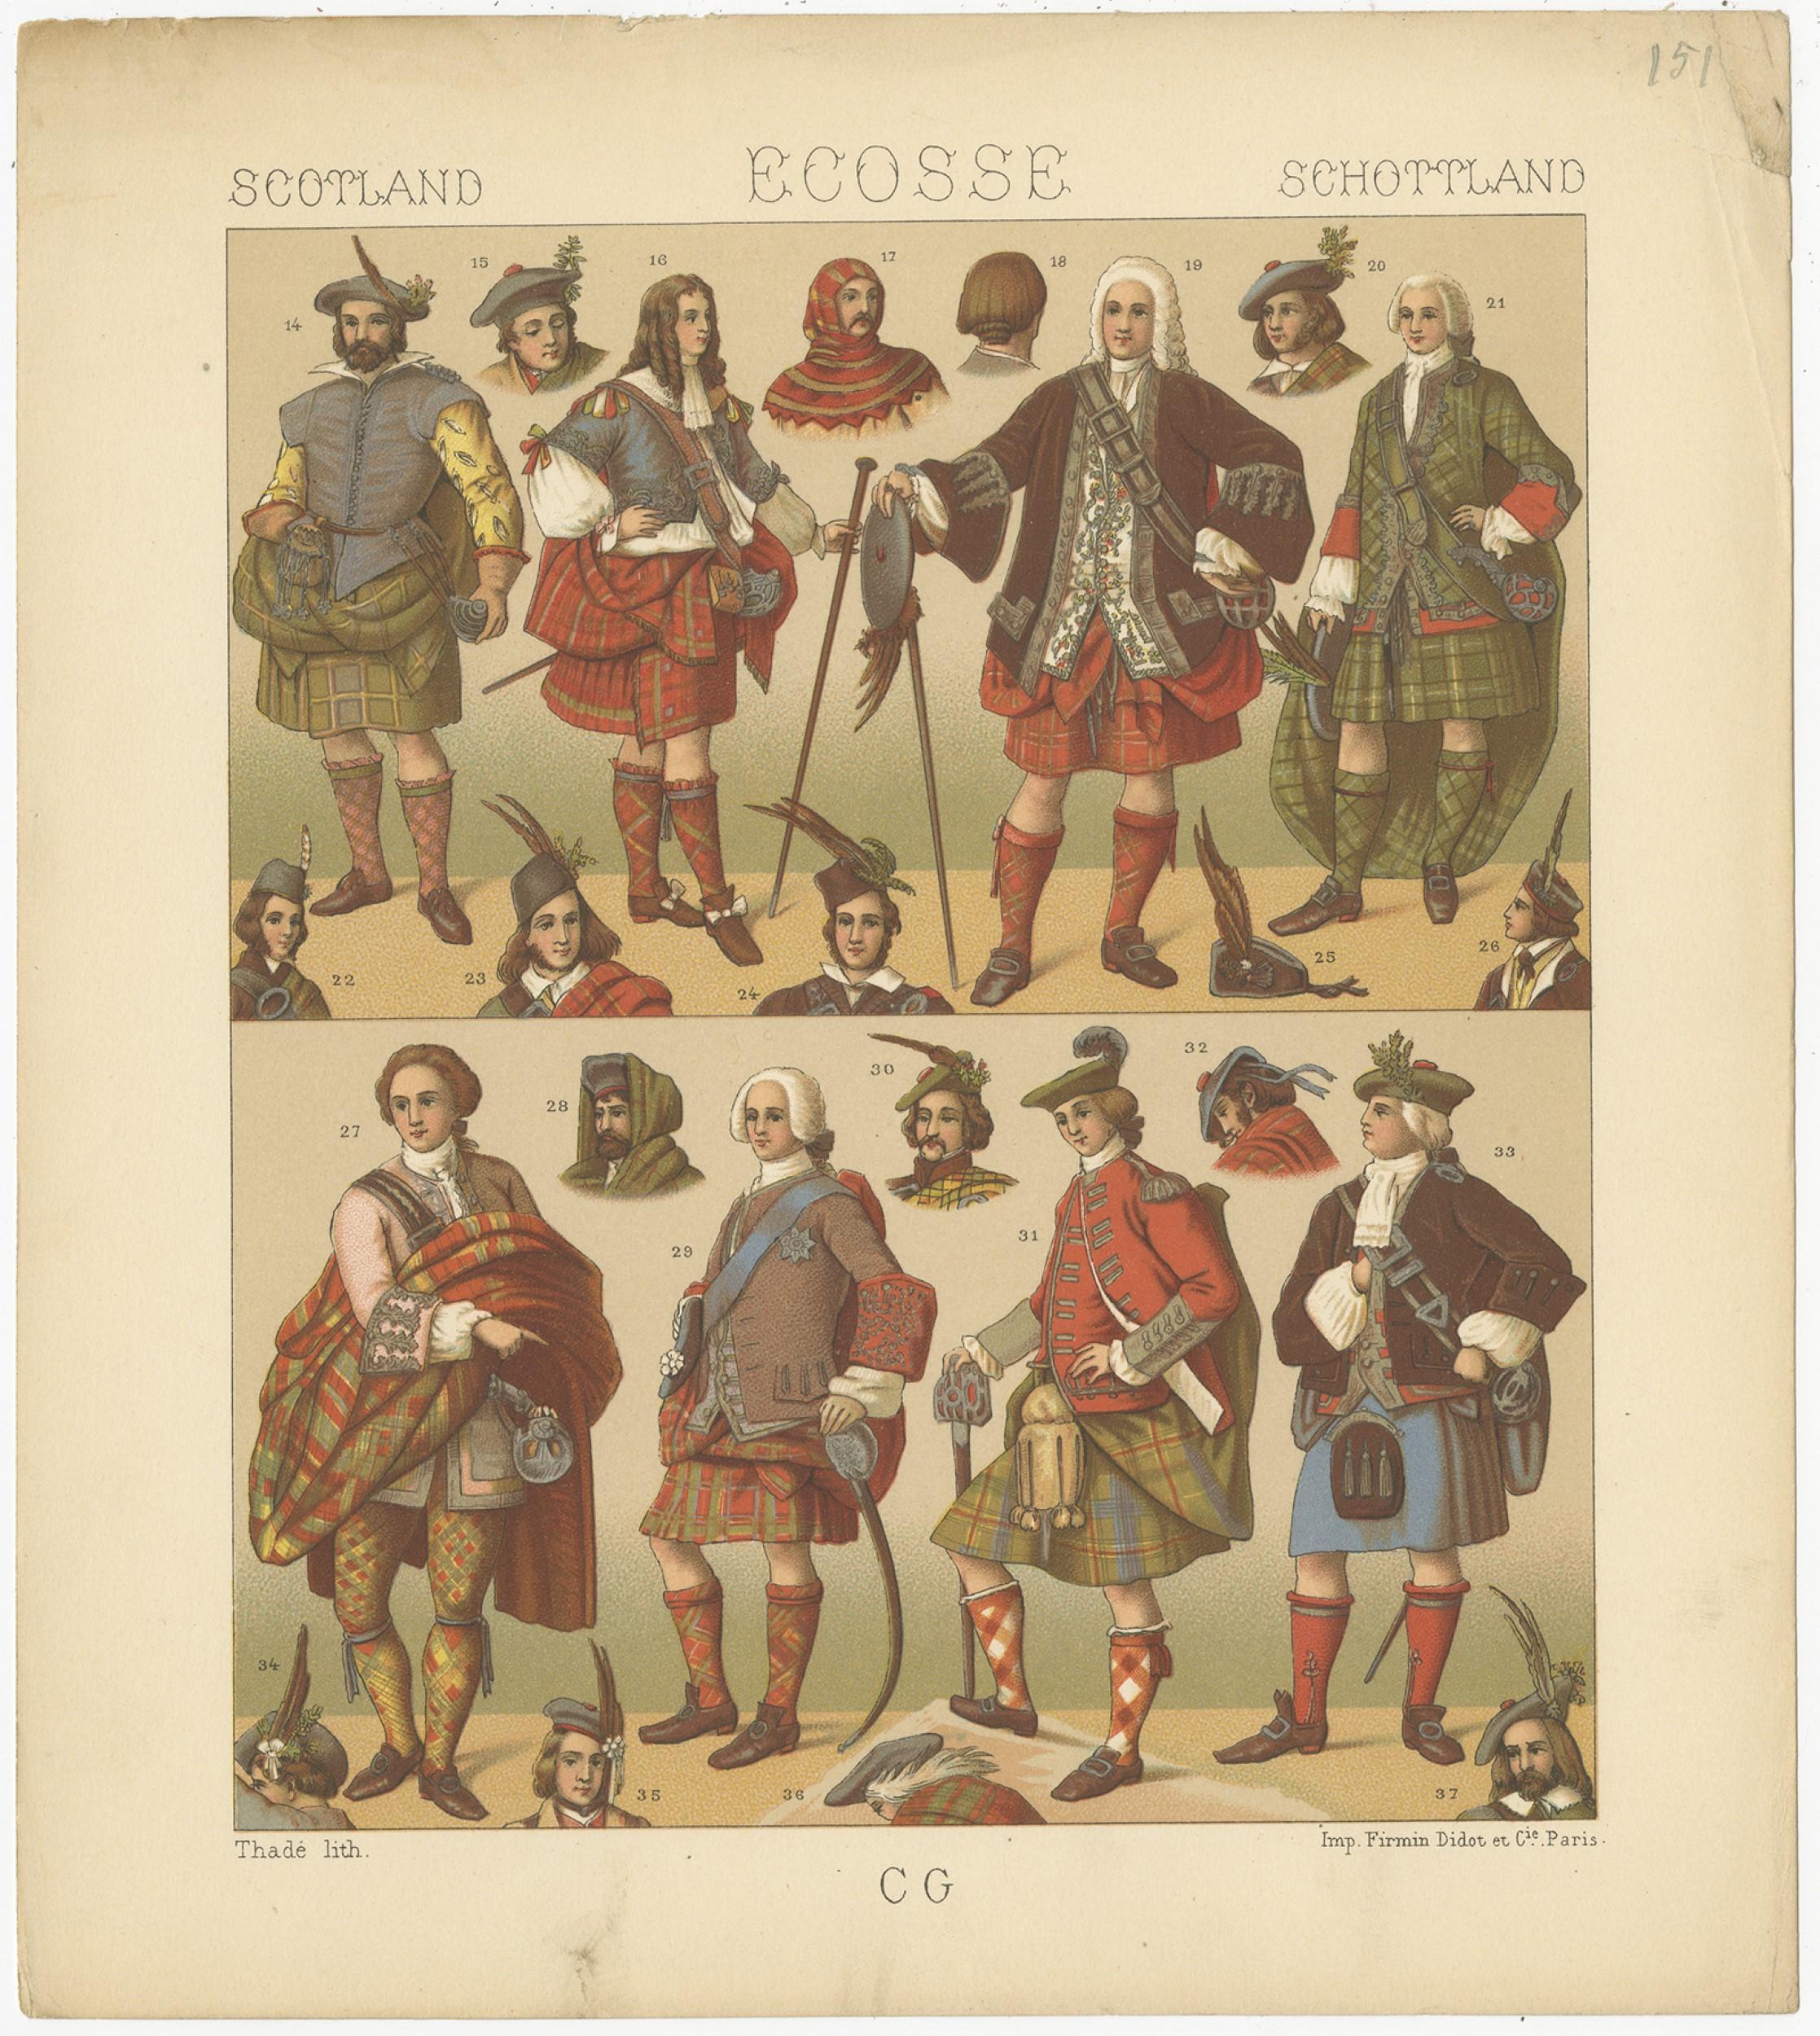 Antique print titled 'Scotland - Ecosse - Schottland'. Chromolithograph of Scottish Men Outfits. This print originates from 'Le Costume Historique' by M.A. Racinet. Published, circa 1880.
 
 